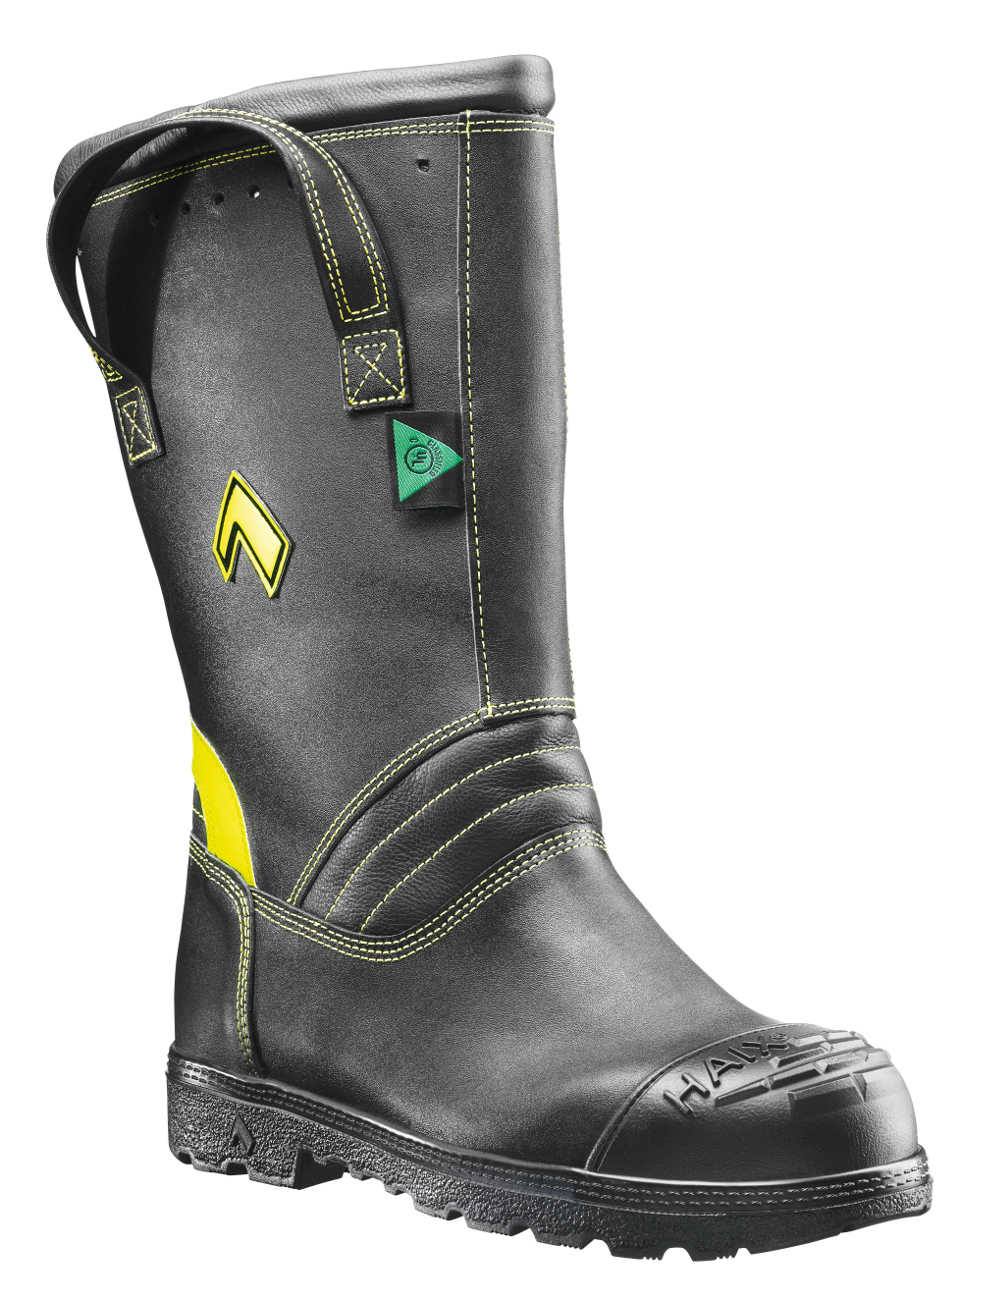 HAIX Fire Hunter Xtreme Womens (501606) | Free Shipping | The Climate System essentially works likes an air conditioning system in your boot. Hard facts inside and out HAIX Fire Hunter Xtreme Womens Item no. 501606 Sun Reflect Leather Chemical/bloodborne pathogen protection Climate system Washable & Exchangeable Insole 